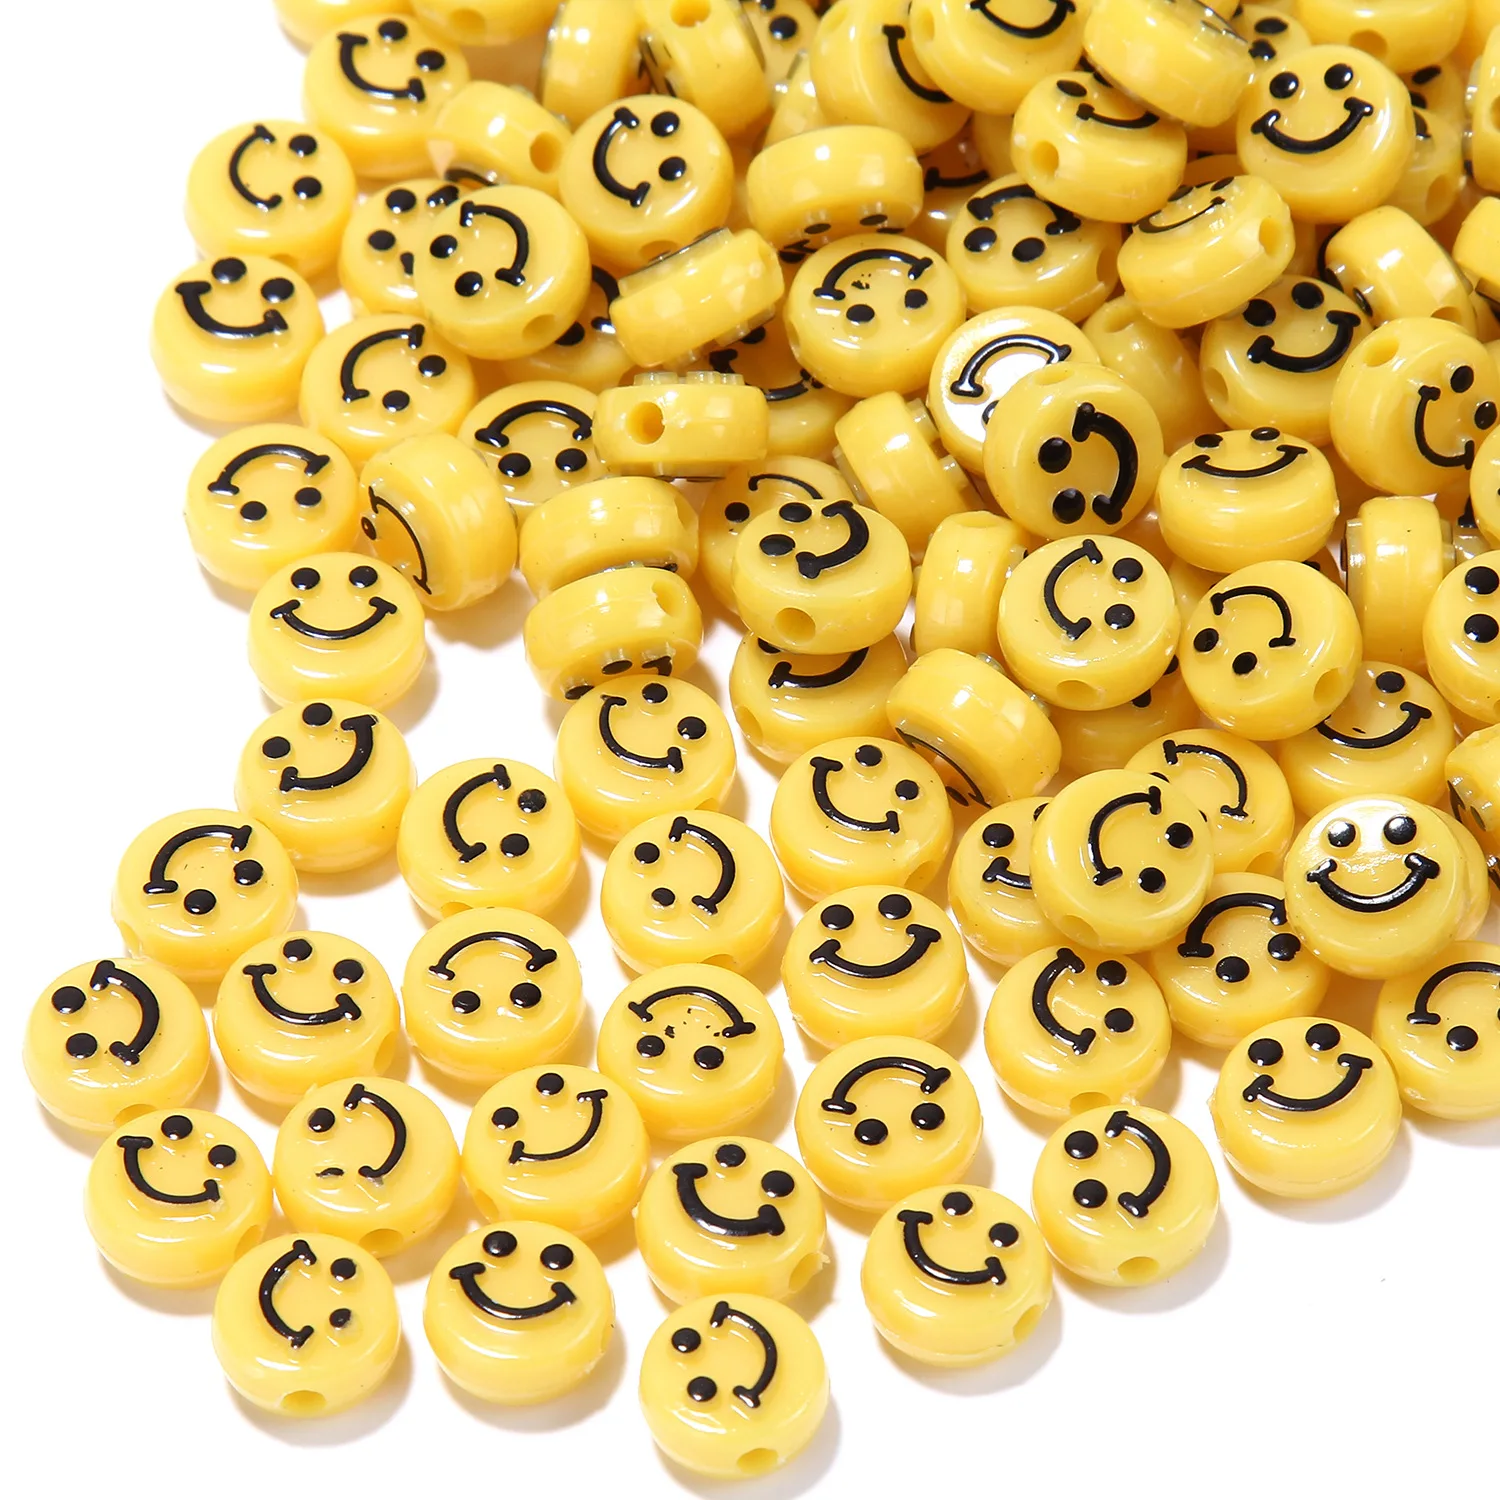 

50 PCS 10mm acrylic color black gold smiley polymer clay spacer beads, used for jewelry making DIY bracelet accessories